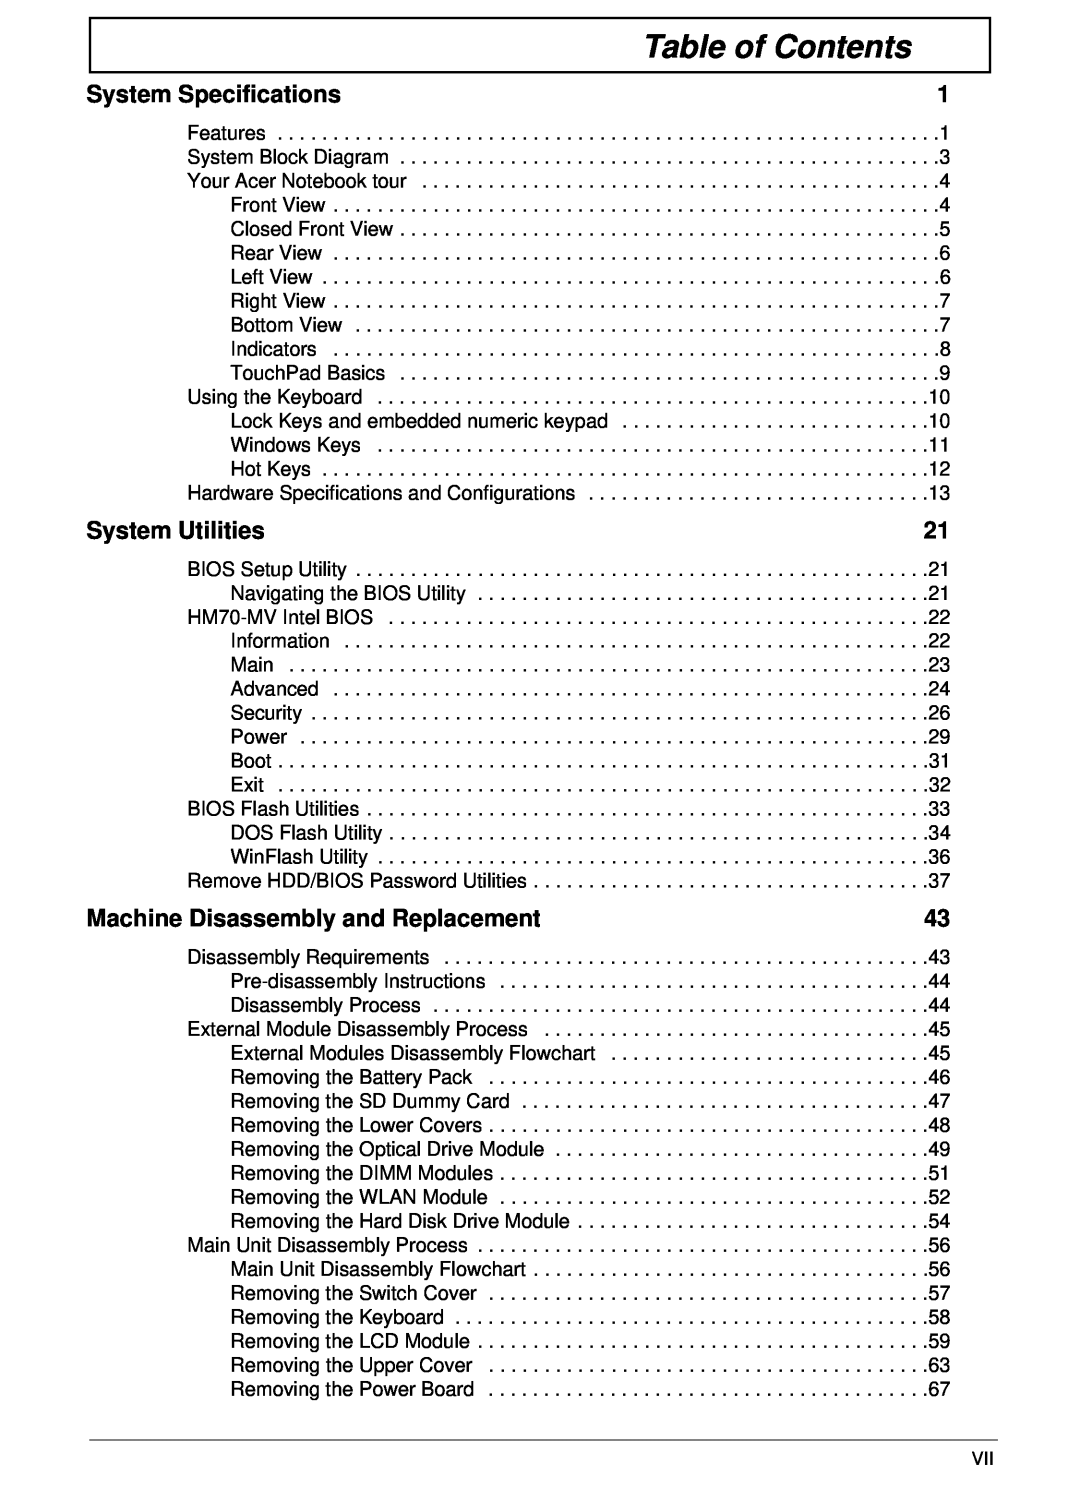 Acer 7315, 7715Z manual Table of Contents, System Specifications, System Utilities, Machine Disassembly and Replacement 